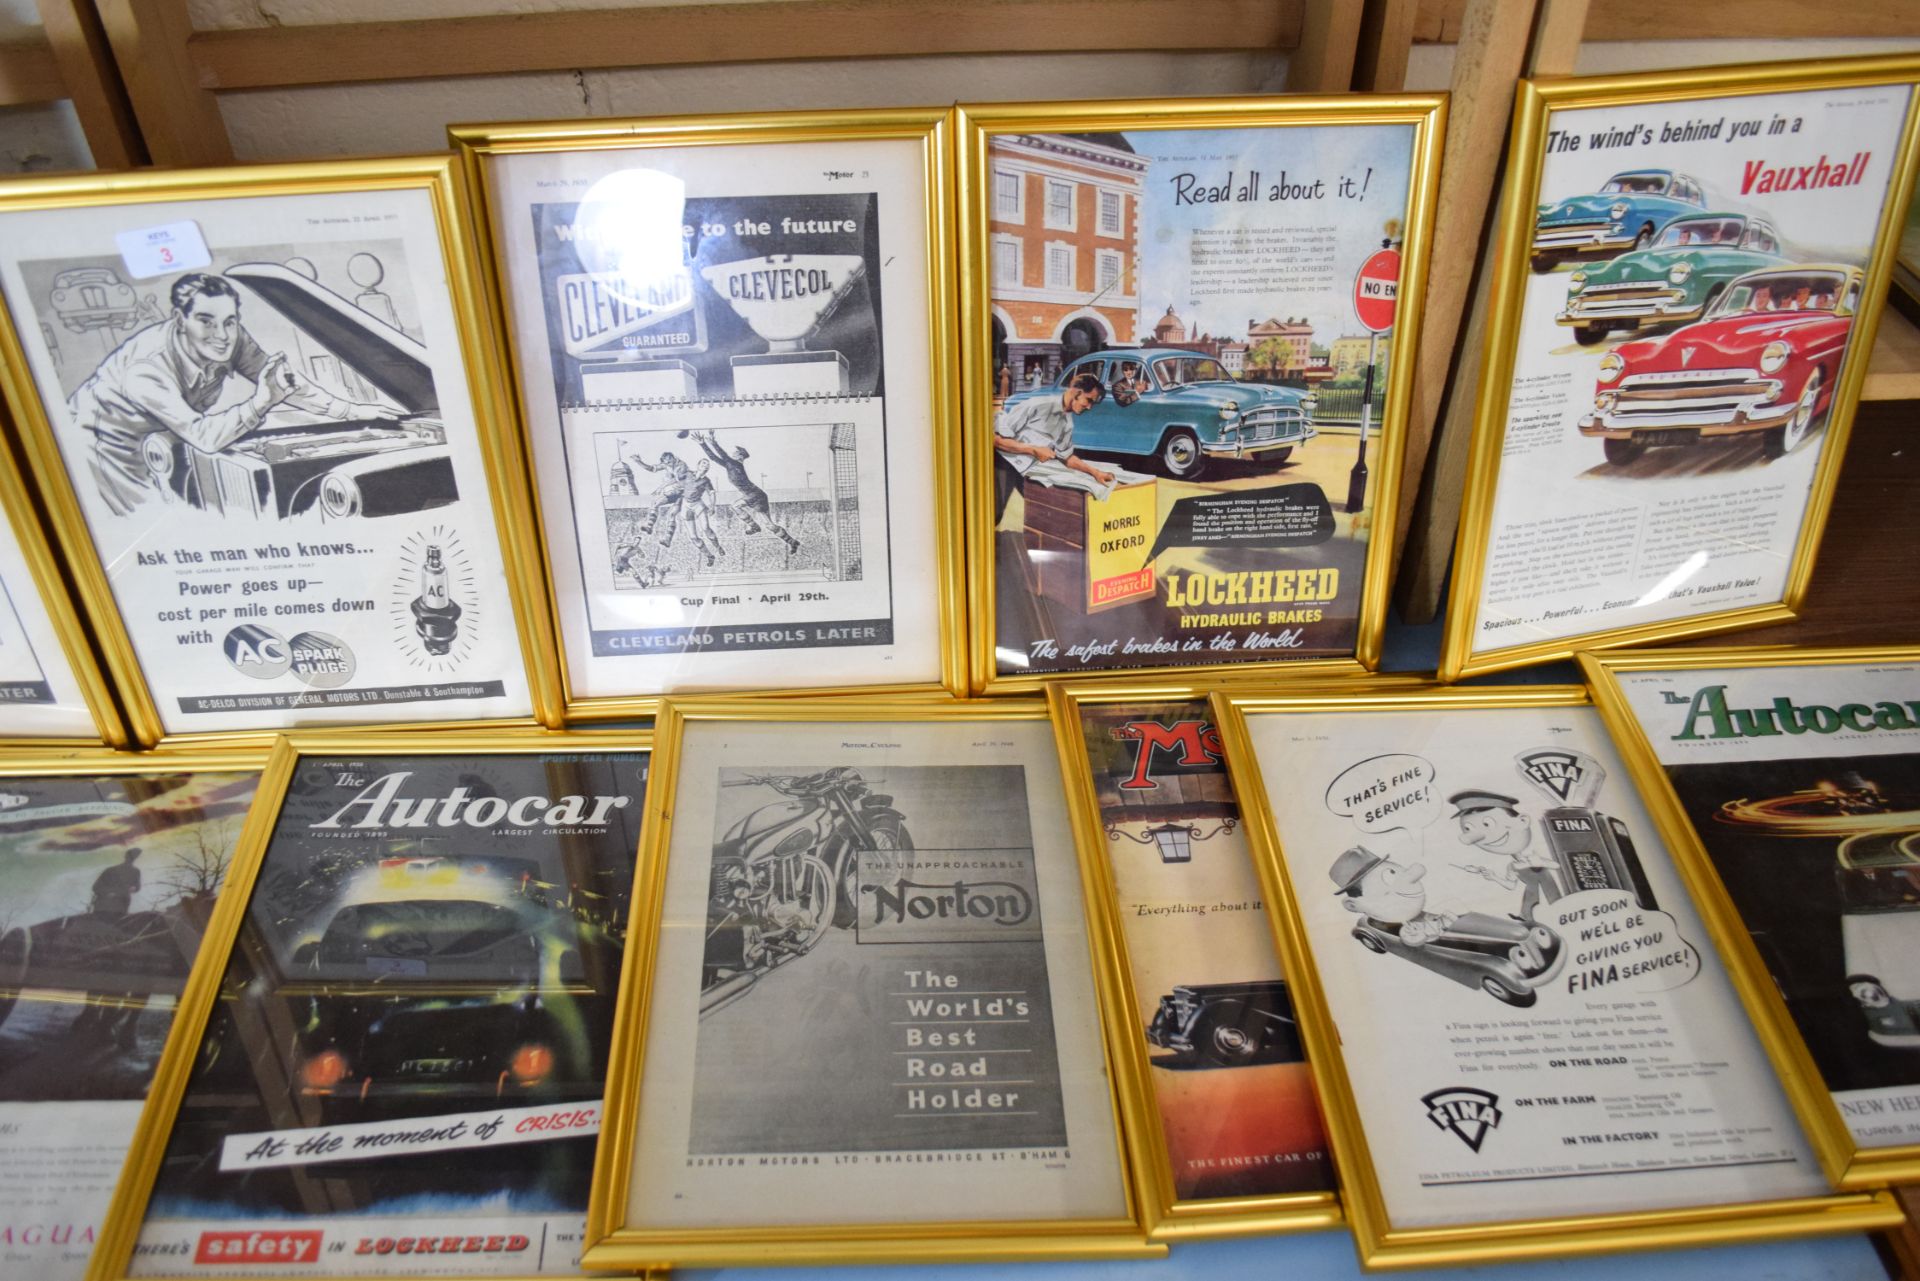 Large quantity of framed magazine advertising prints from The Autocar and The Motor magazines to - Image 3 of 3